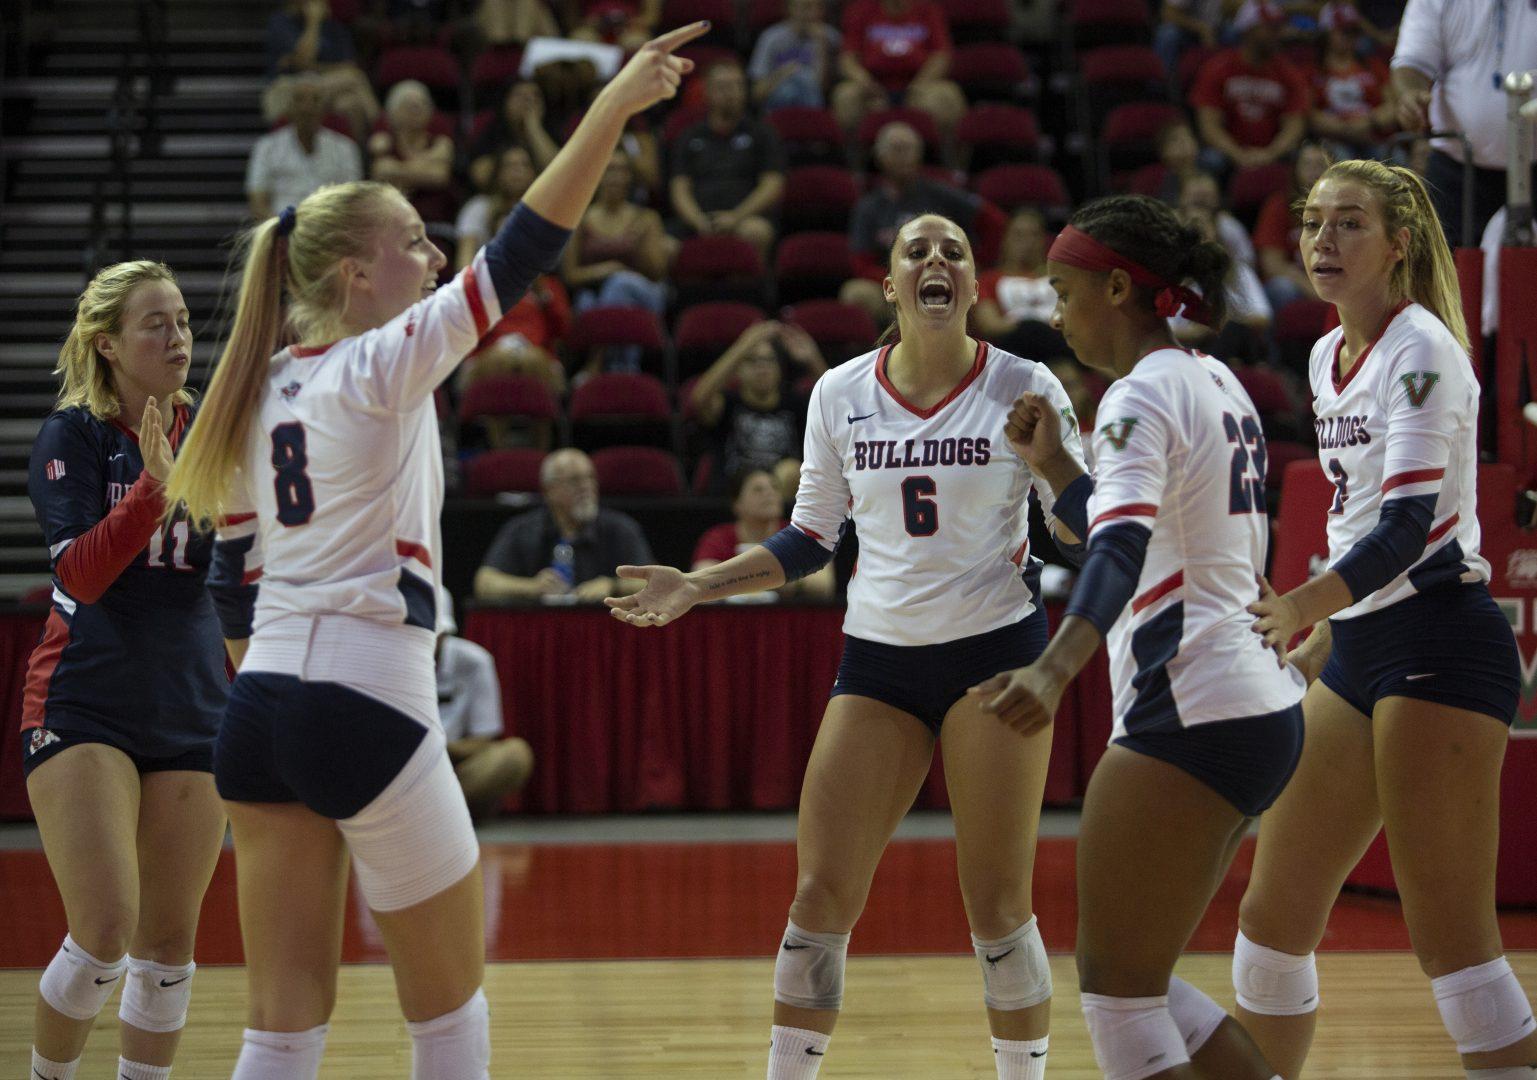 Volleyball team celebrates a point made by Amilya Thompson against the Nevada Wolf Pack at The Save Mart Center on Thursday, Sept. 26, 2019. (Larry Valenzuela/ The Collegian)